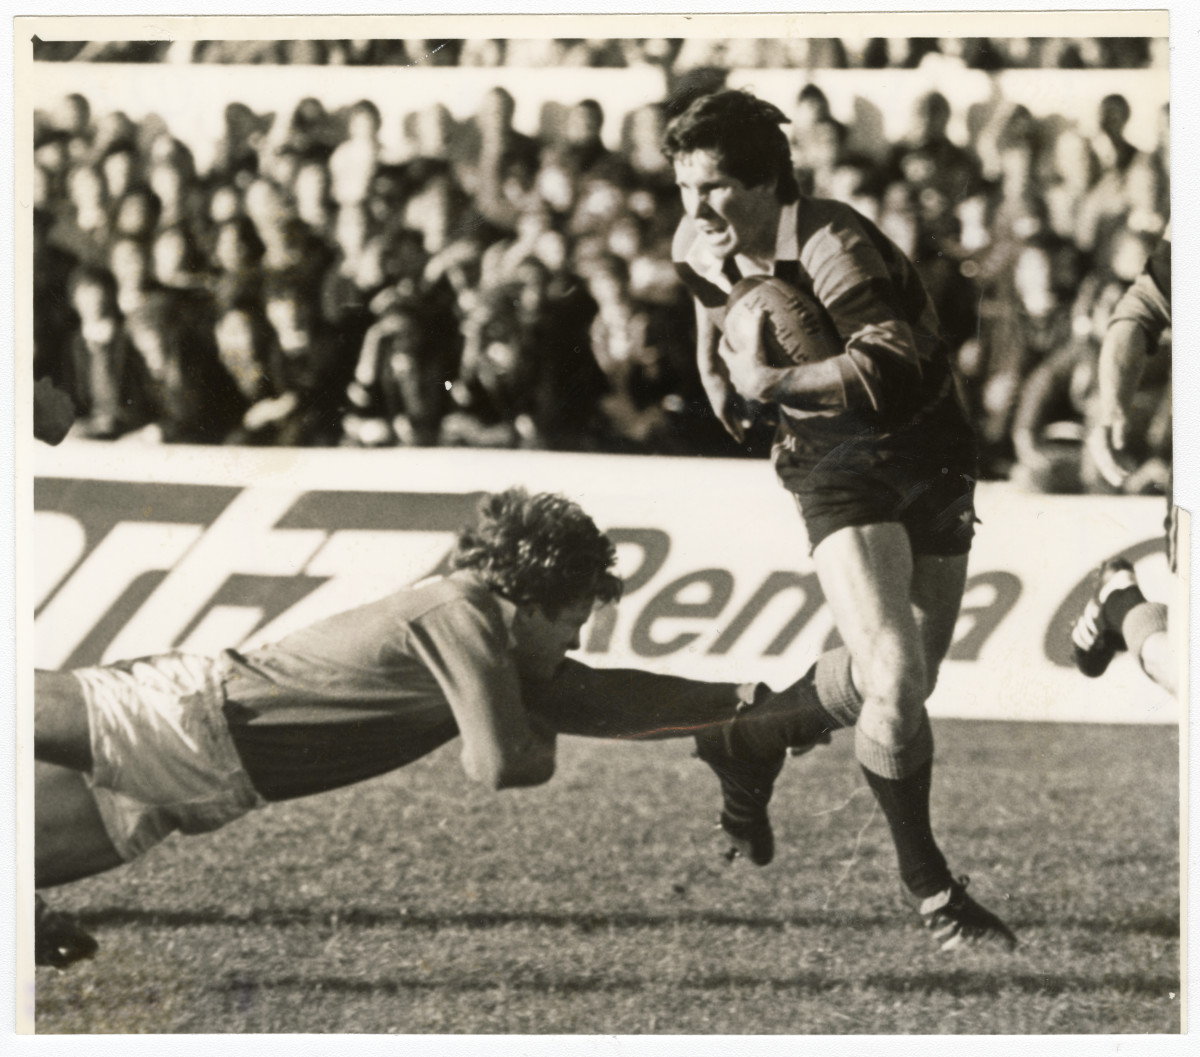 Robbie Deans about to score a try against the Lions | discoverywall.nz